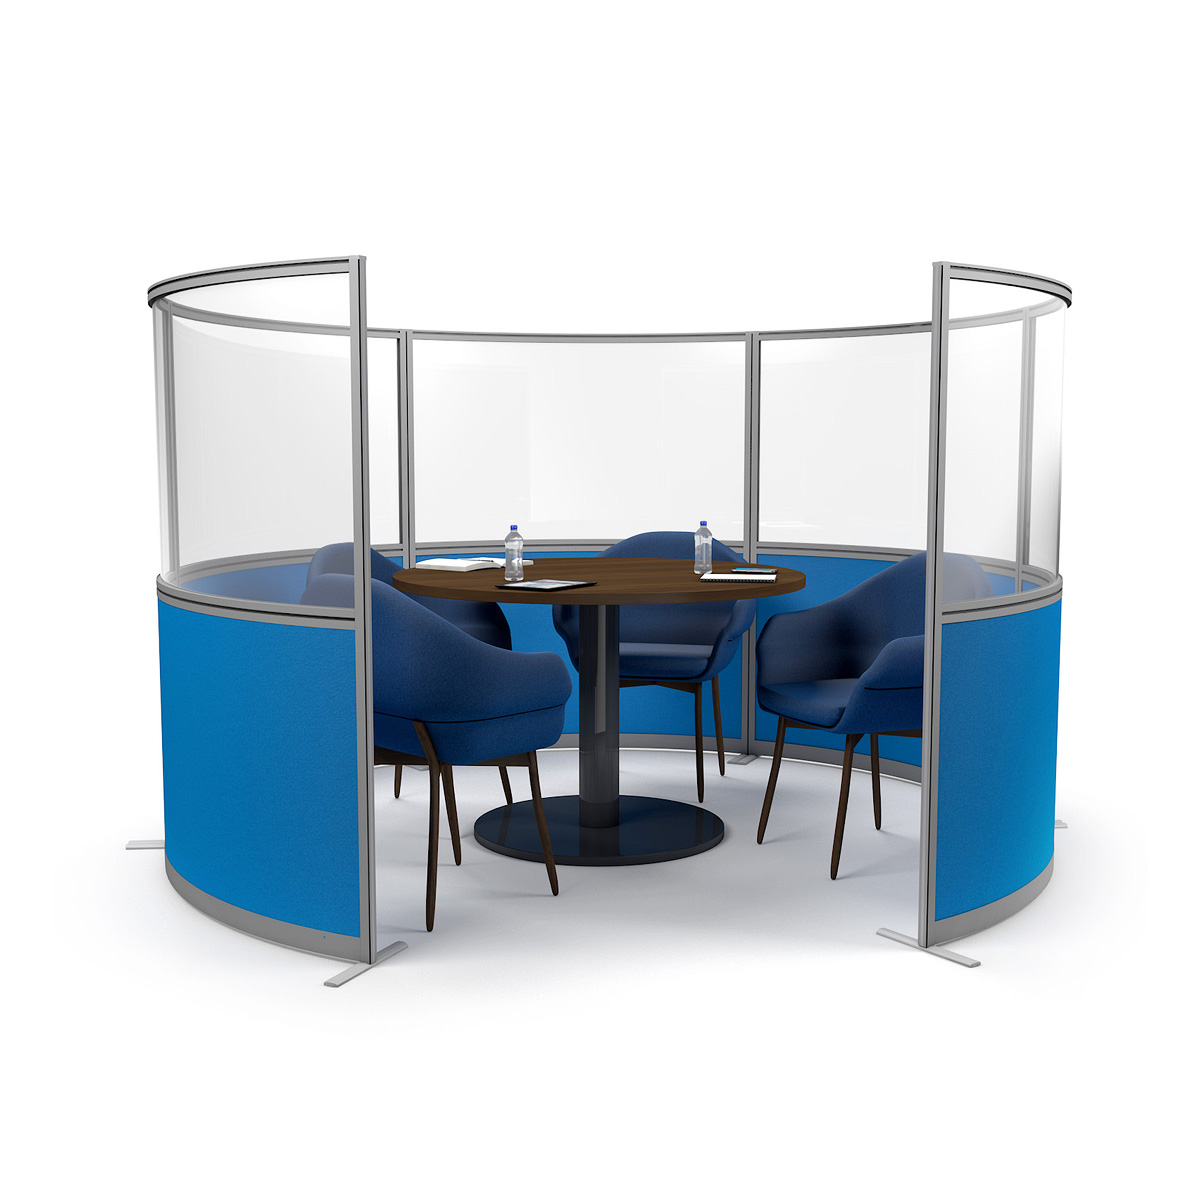 FRONTIER® Curved Free Standing Part-Glazed Office Partitions